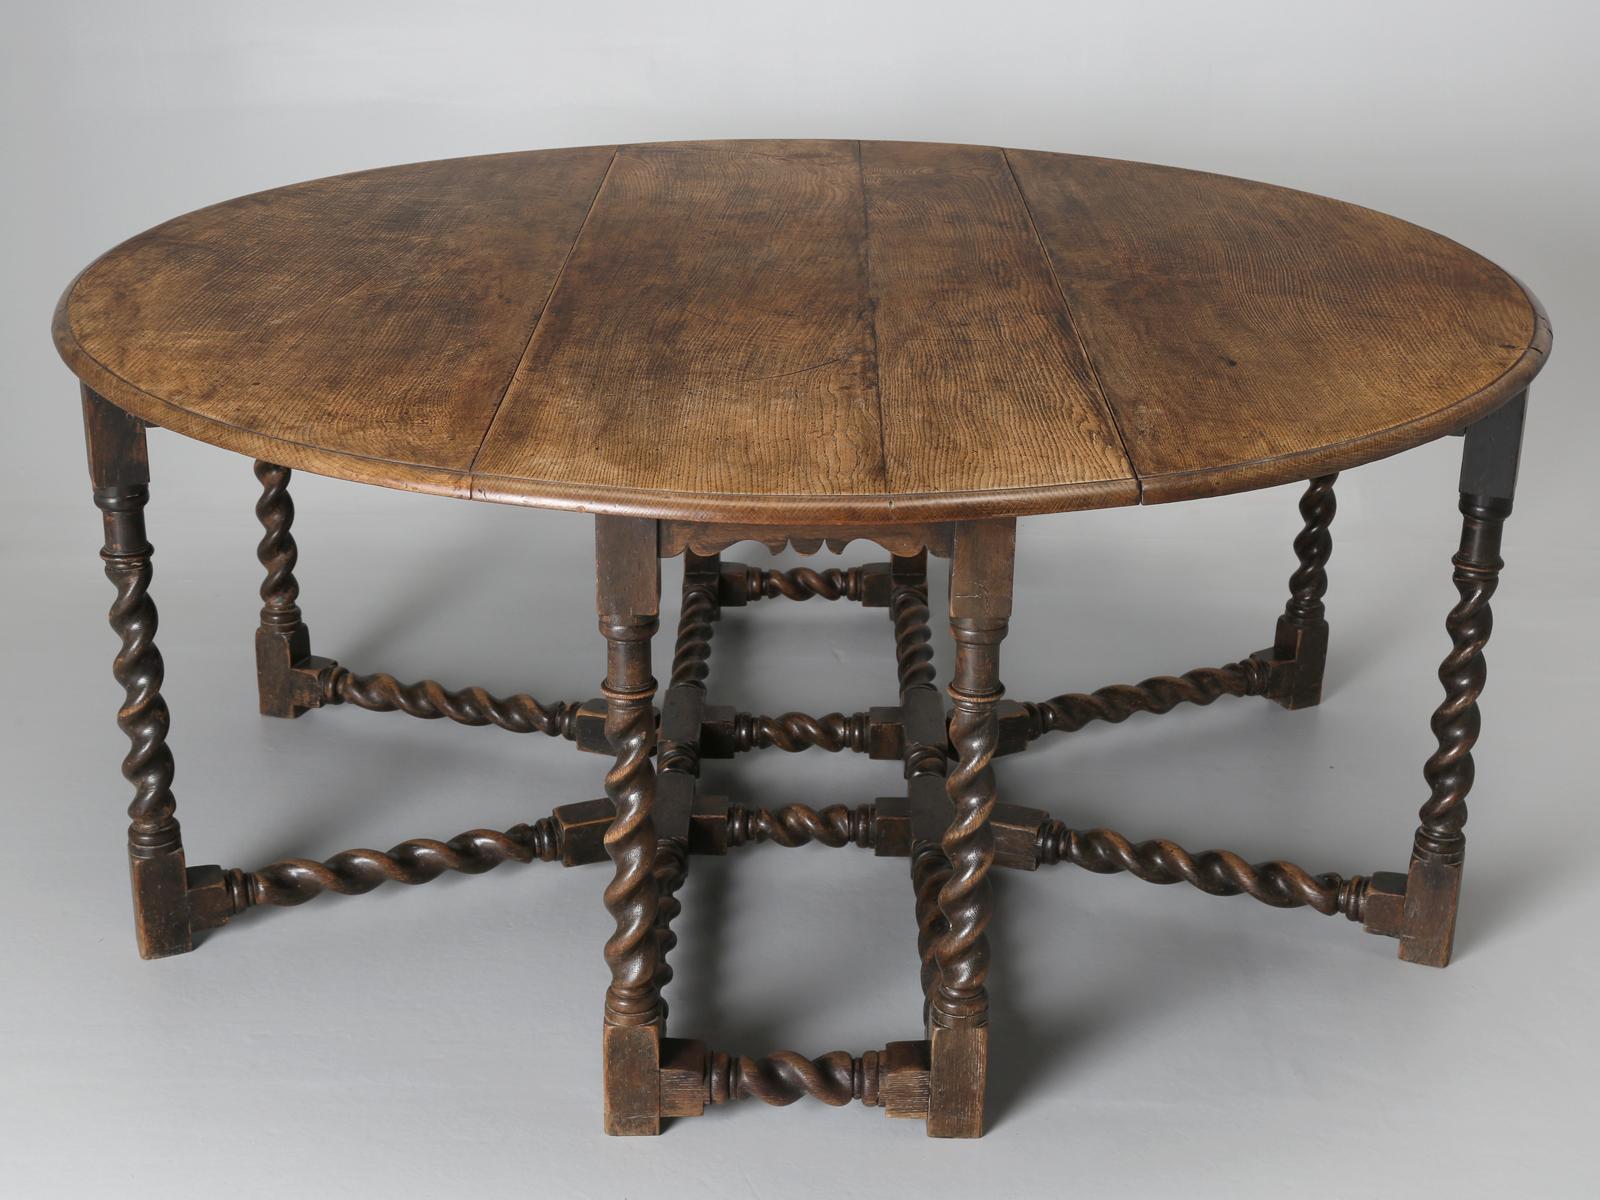 Generally, in the past we have shied away from English drop-leaf tables and for the life of me, I don’t know why? The graining of this antique English oak double gateleg drop-leaf dining table is truly exceptional and I can’t remember when we last